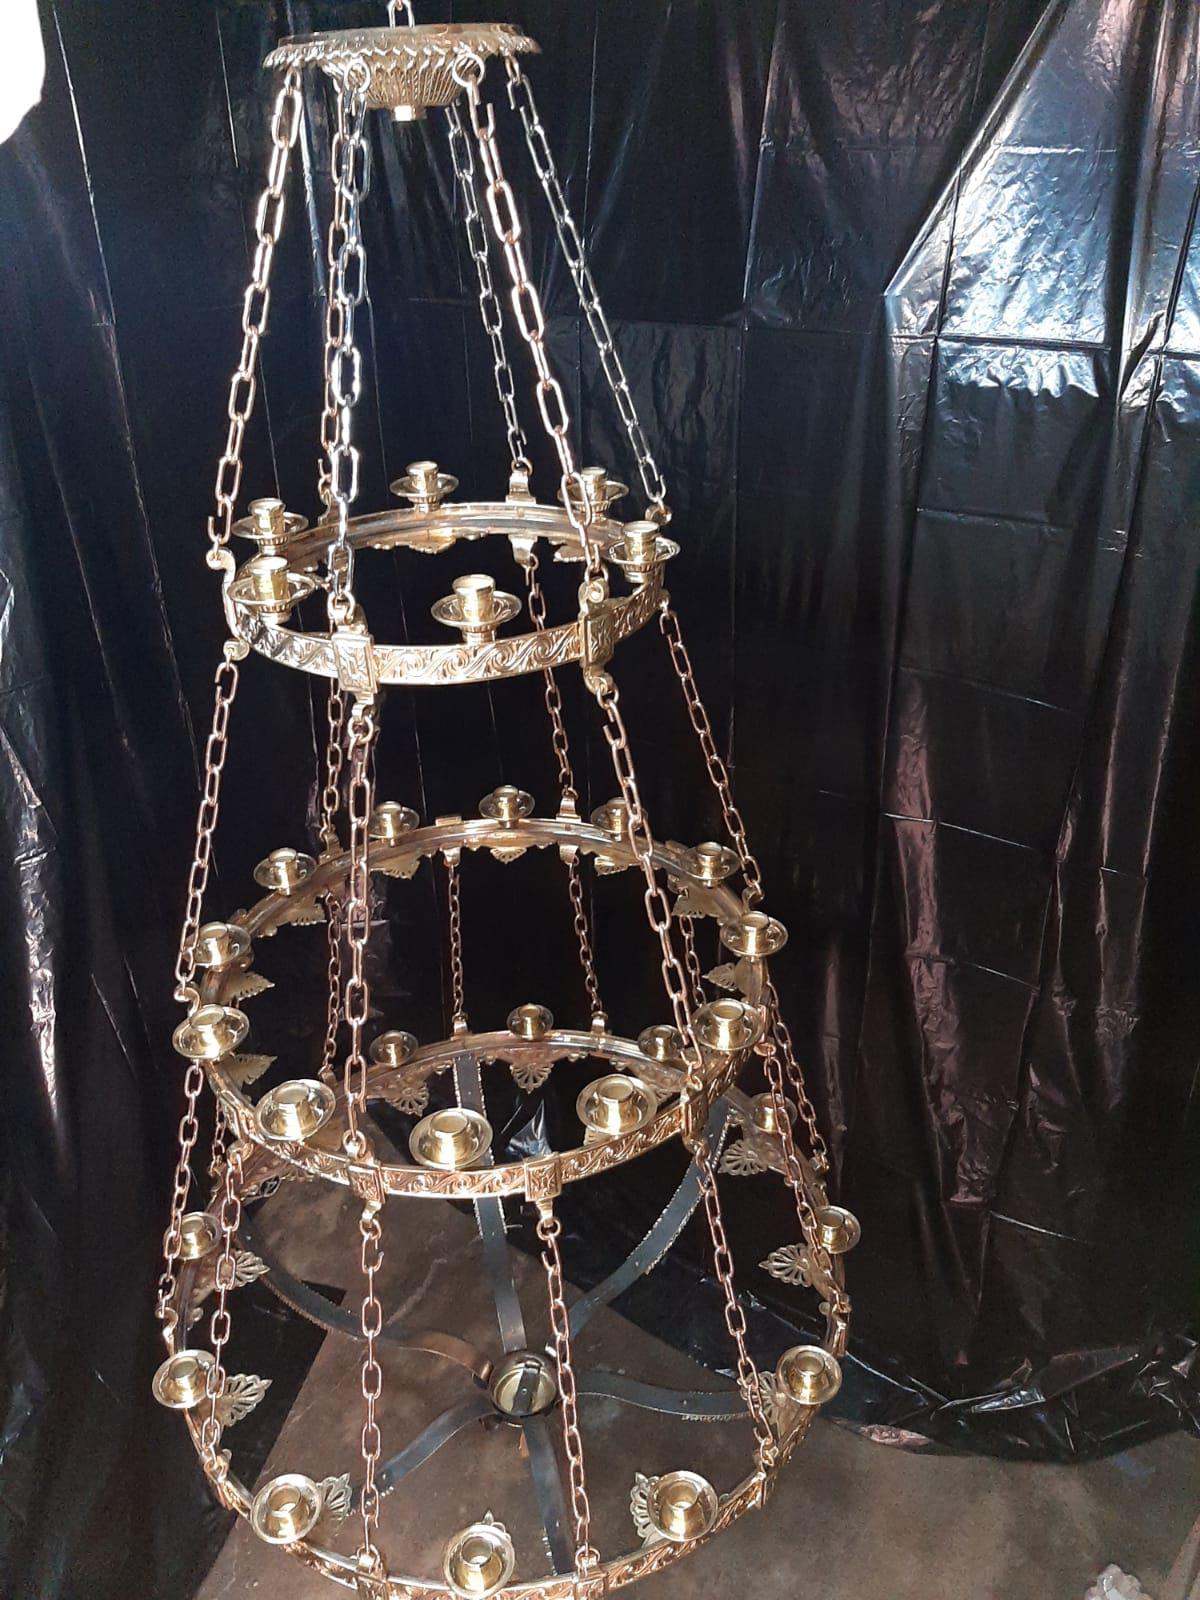 1900's Large Caldwell Gilt Bronze Neoclassic Chandelier with 30 lights In Excellent Condition For Sale In New York, NY